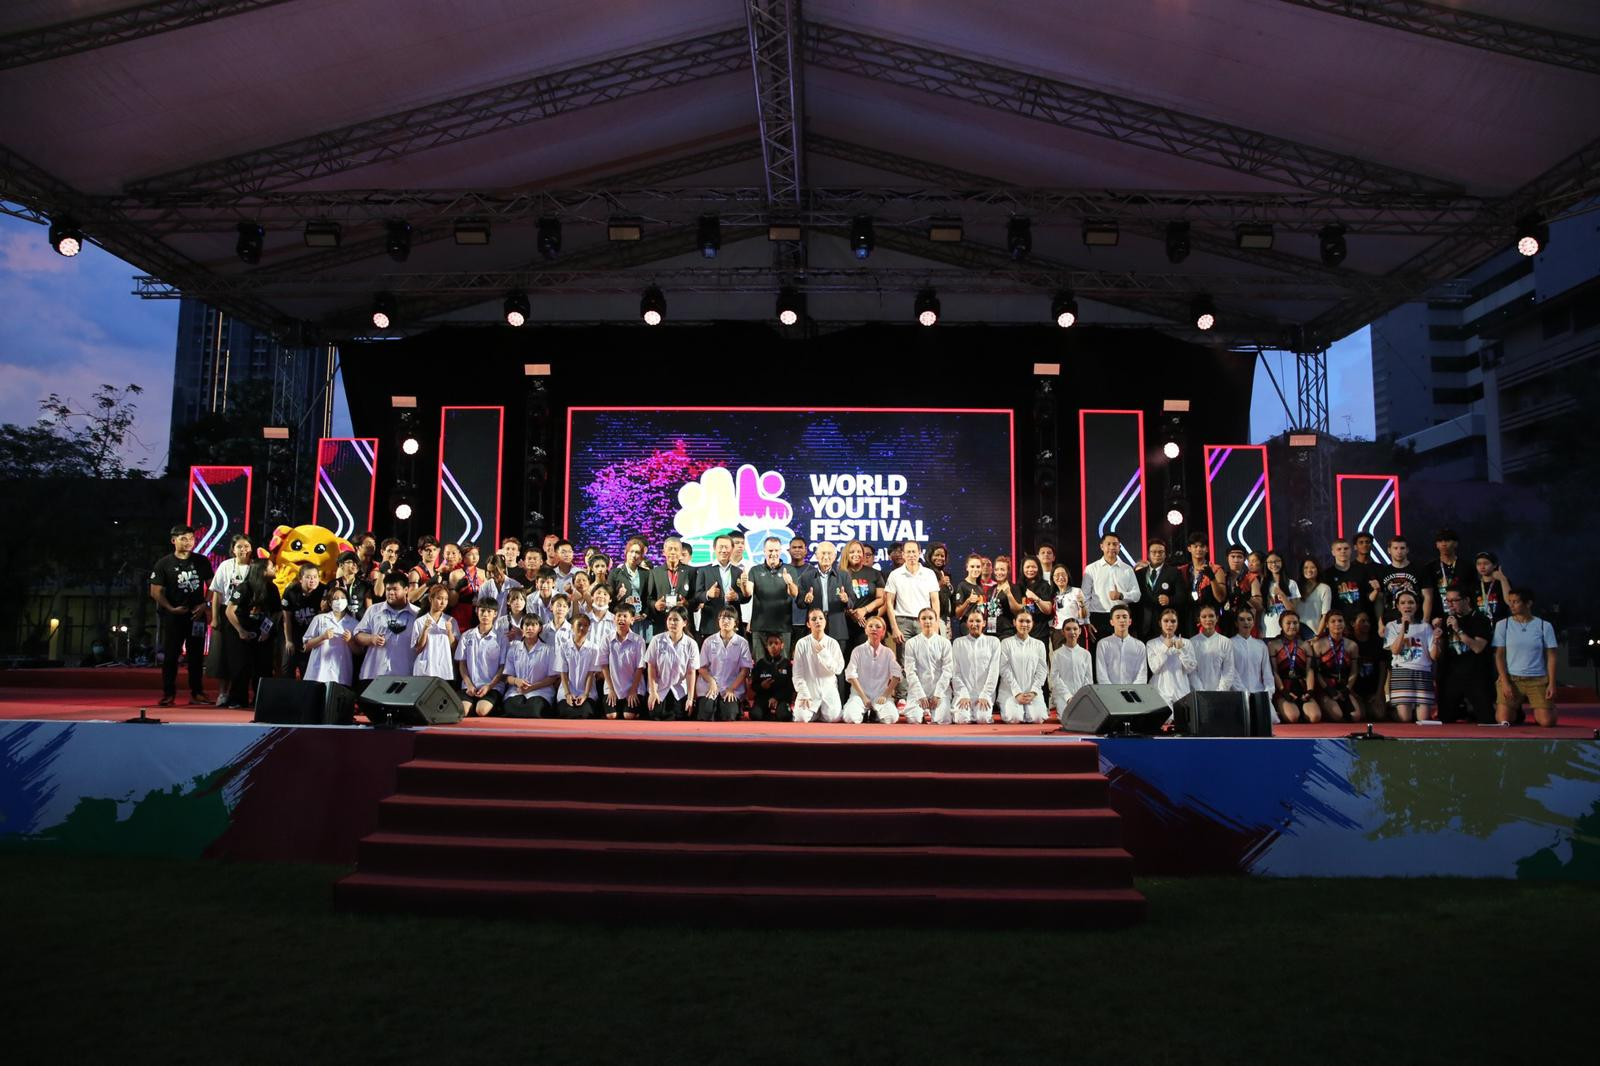 The UTS World Youth Festival concluded today ©UTS